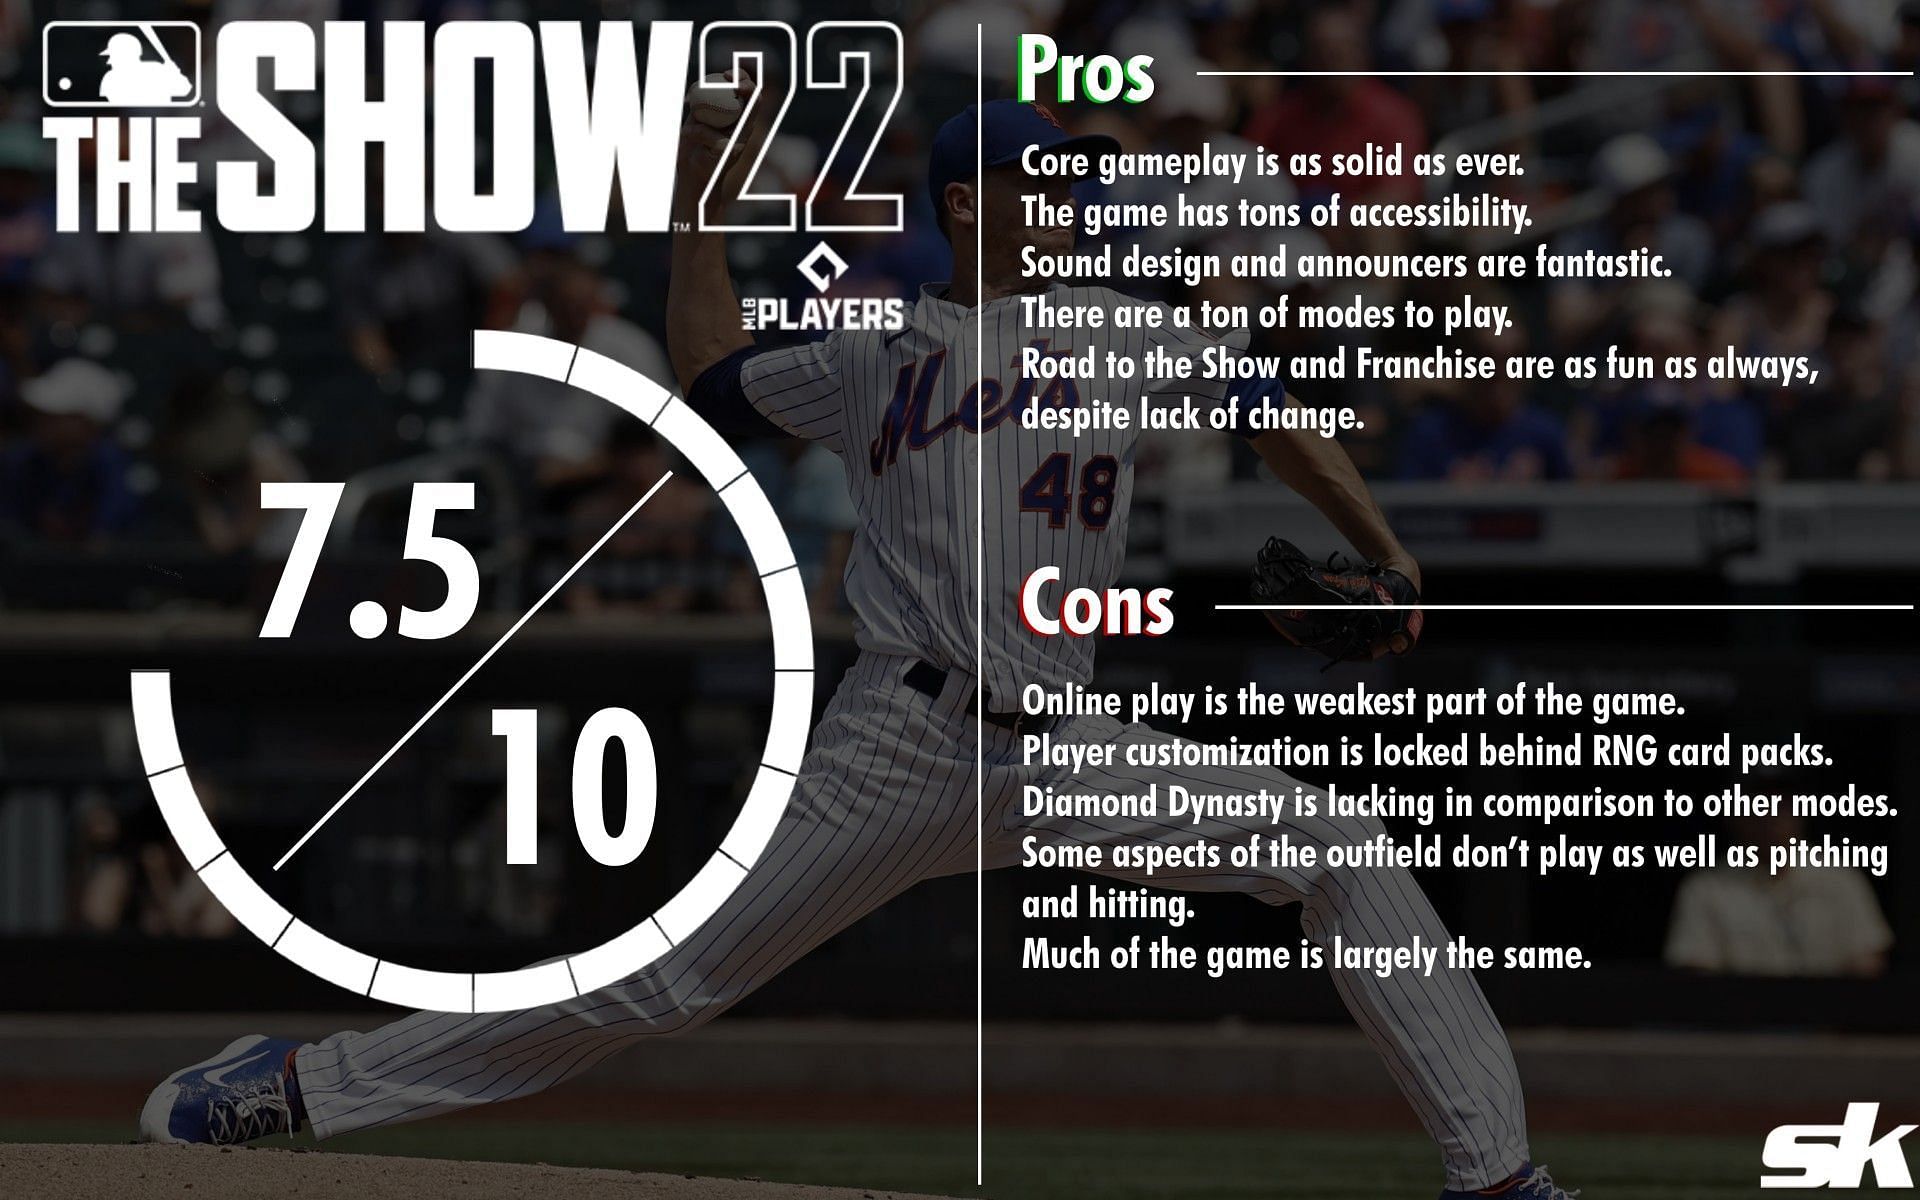 MLB The Show 22 review: Ratings from a fresh perspective